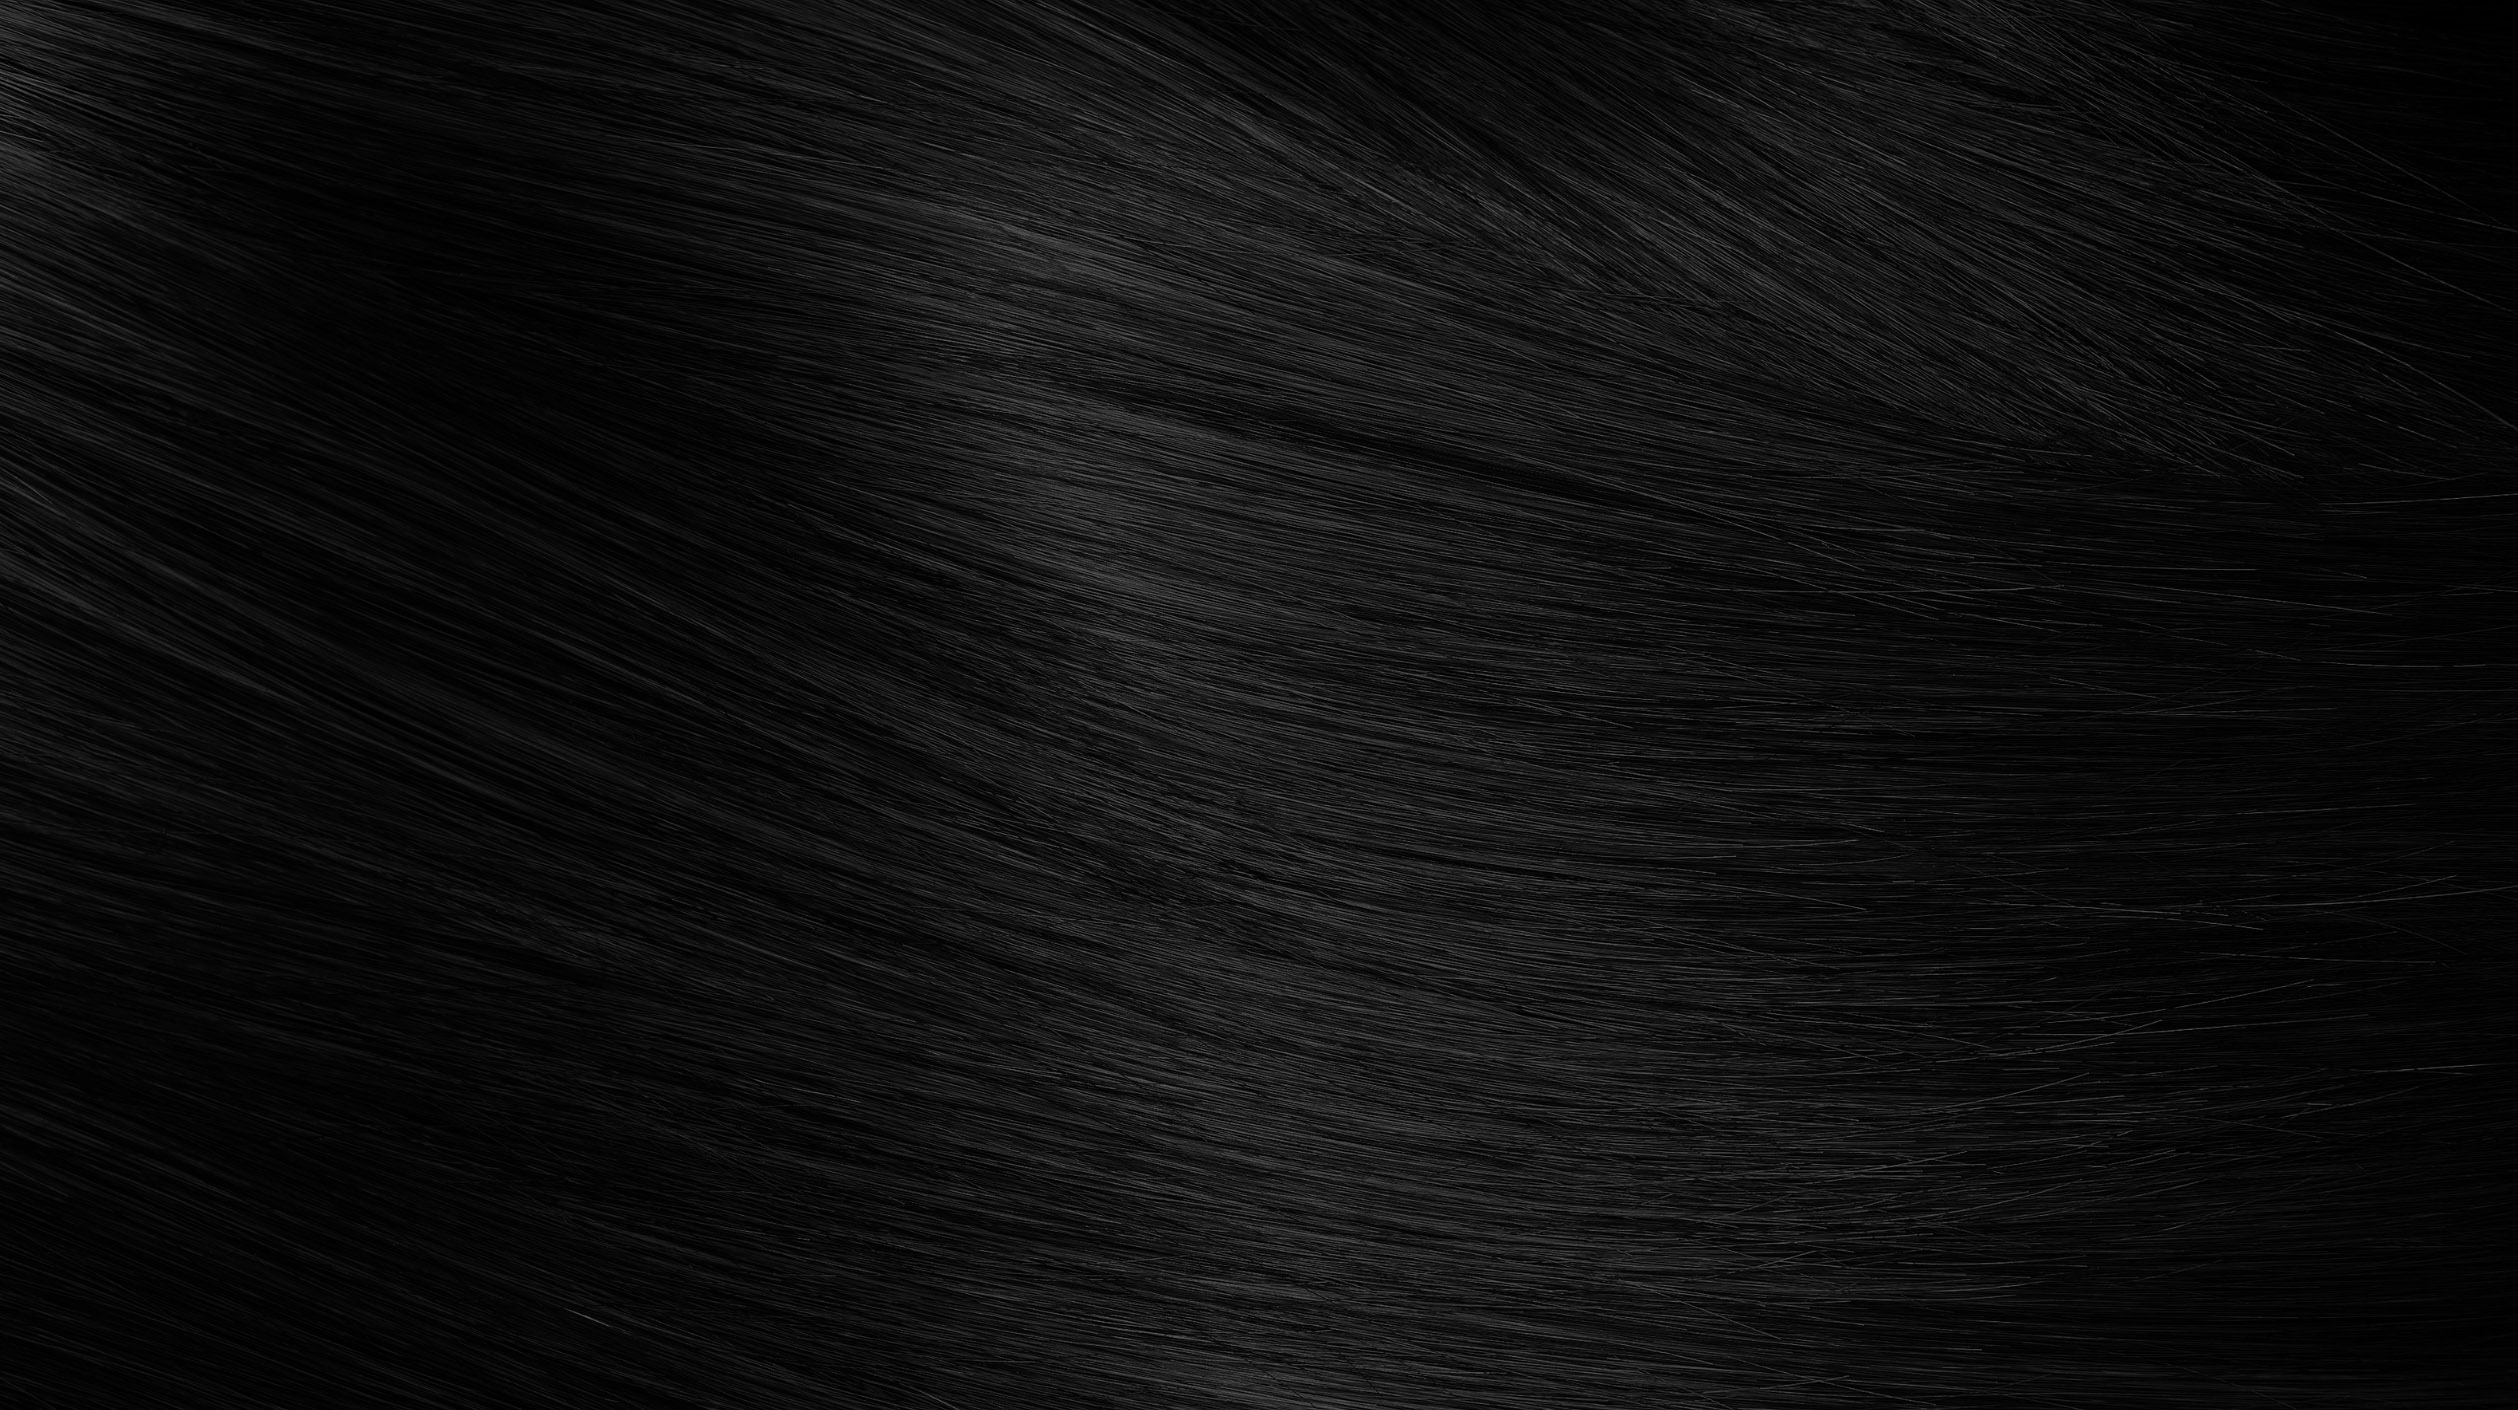 fuller, healthier locks with our various treatments that help stimulate growth in dormant follicles or increase the thickness of existing strands